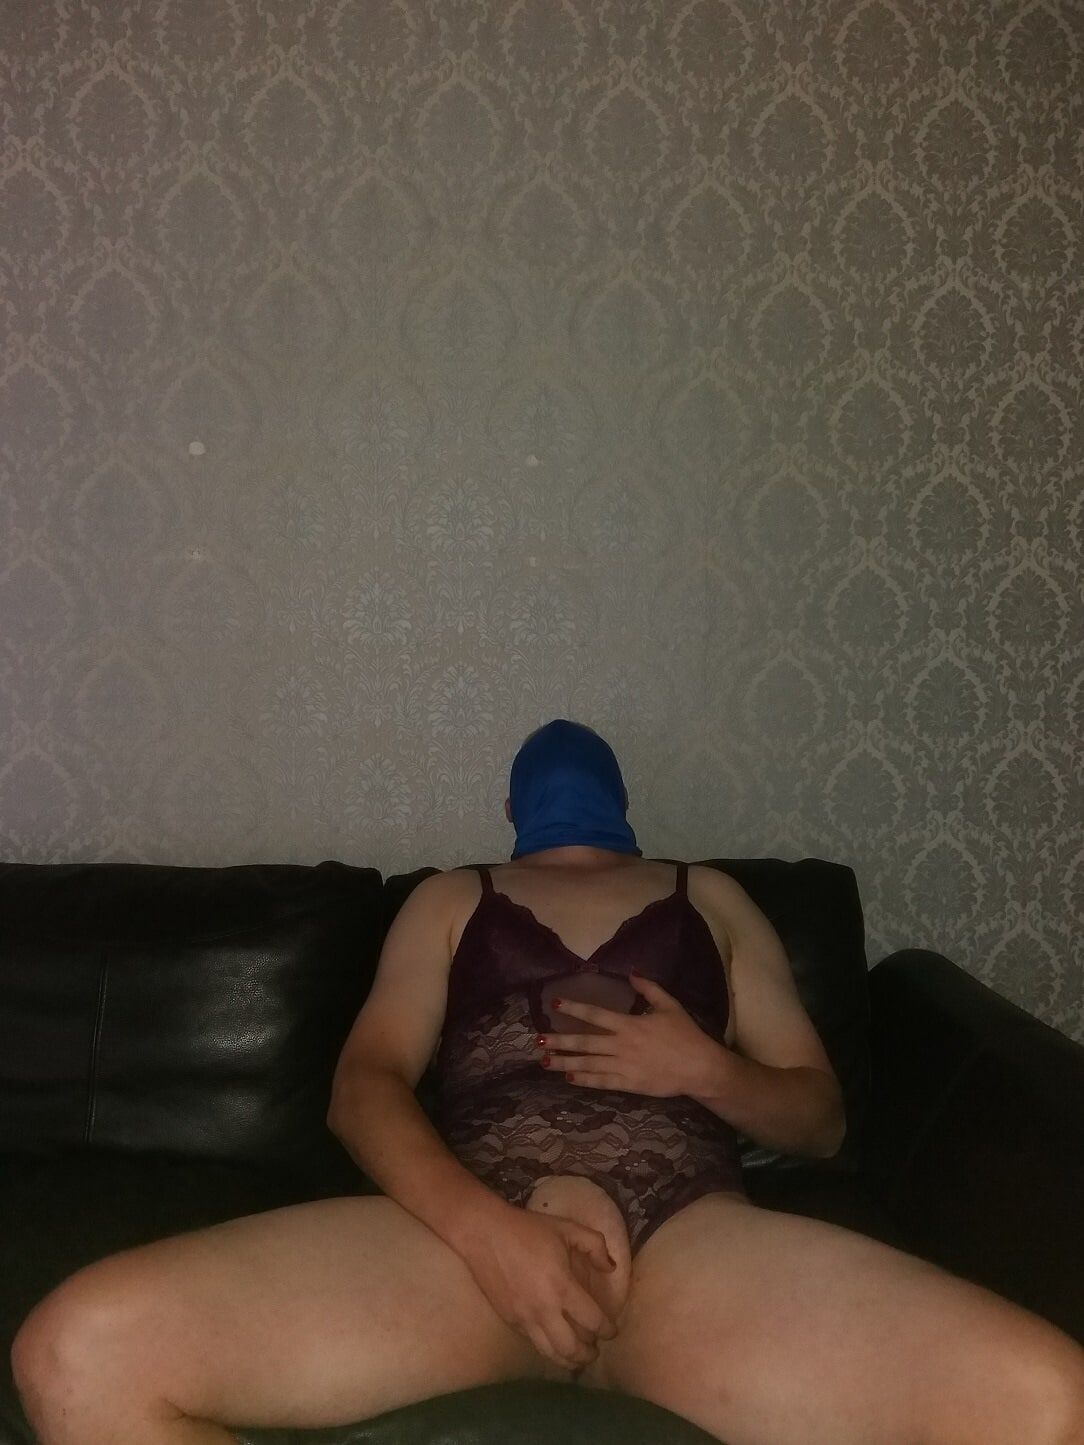 Submissive fuck bitch for male group #15